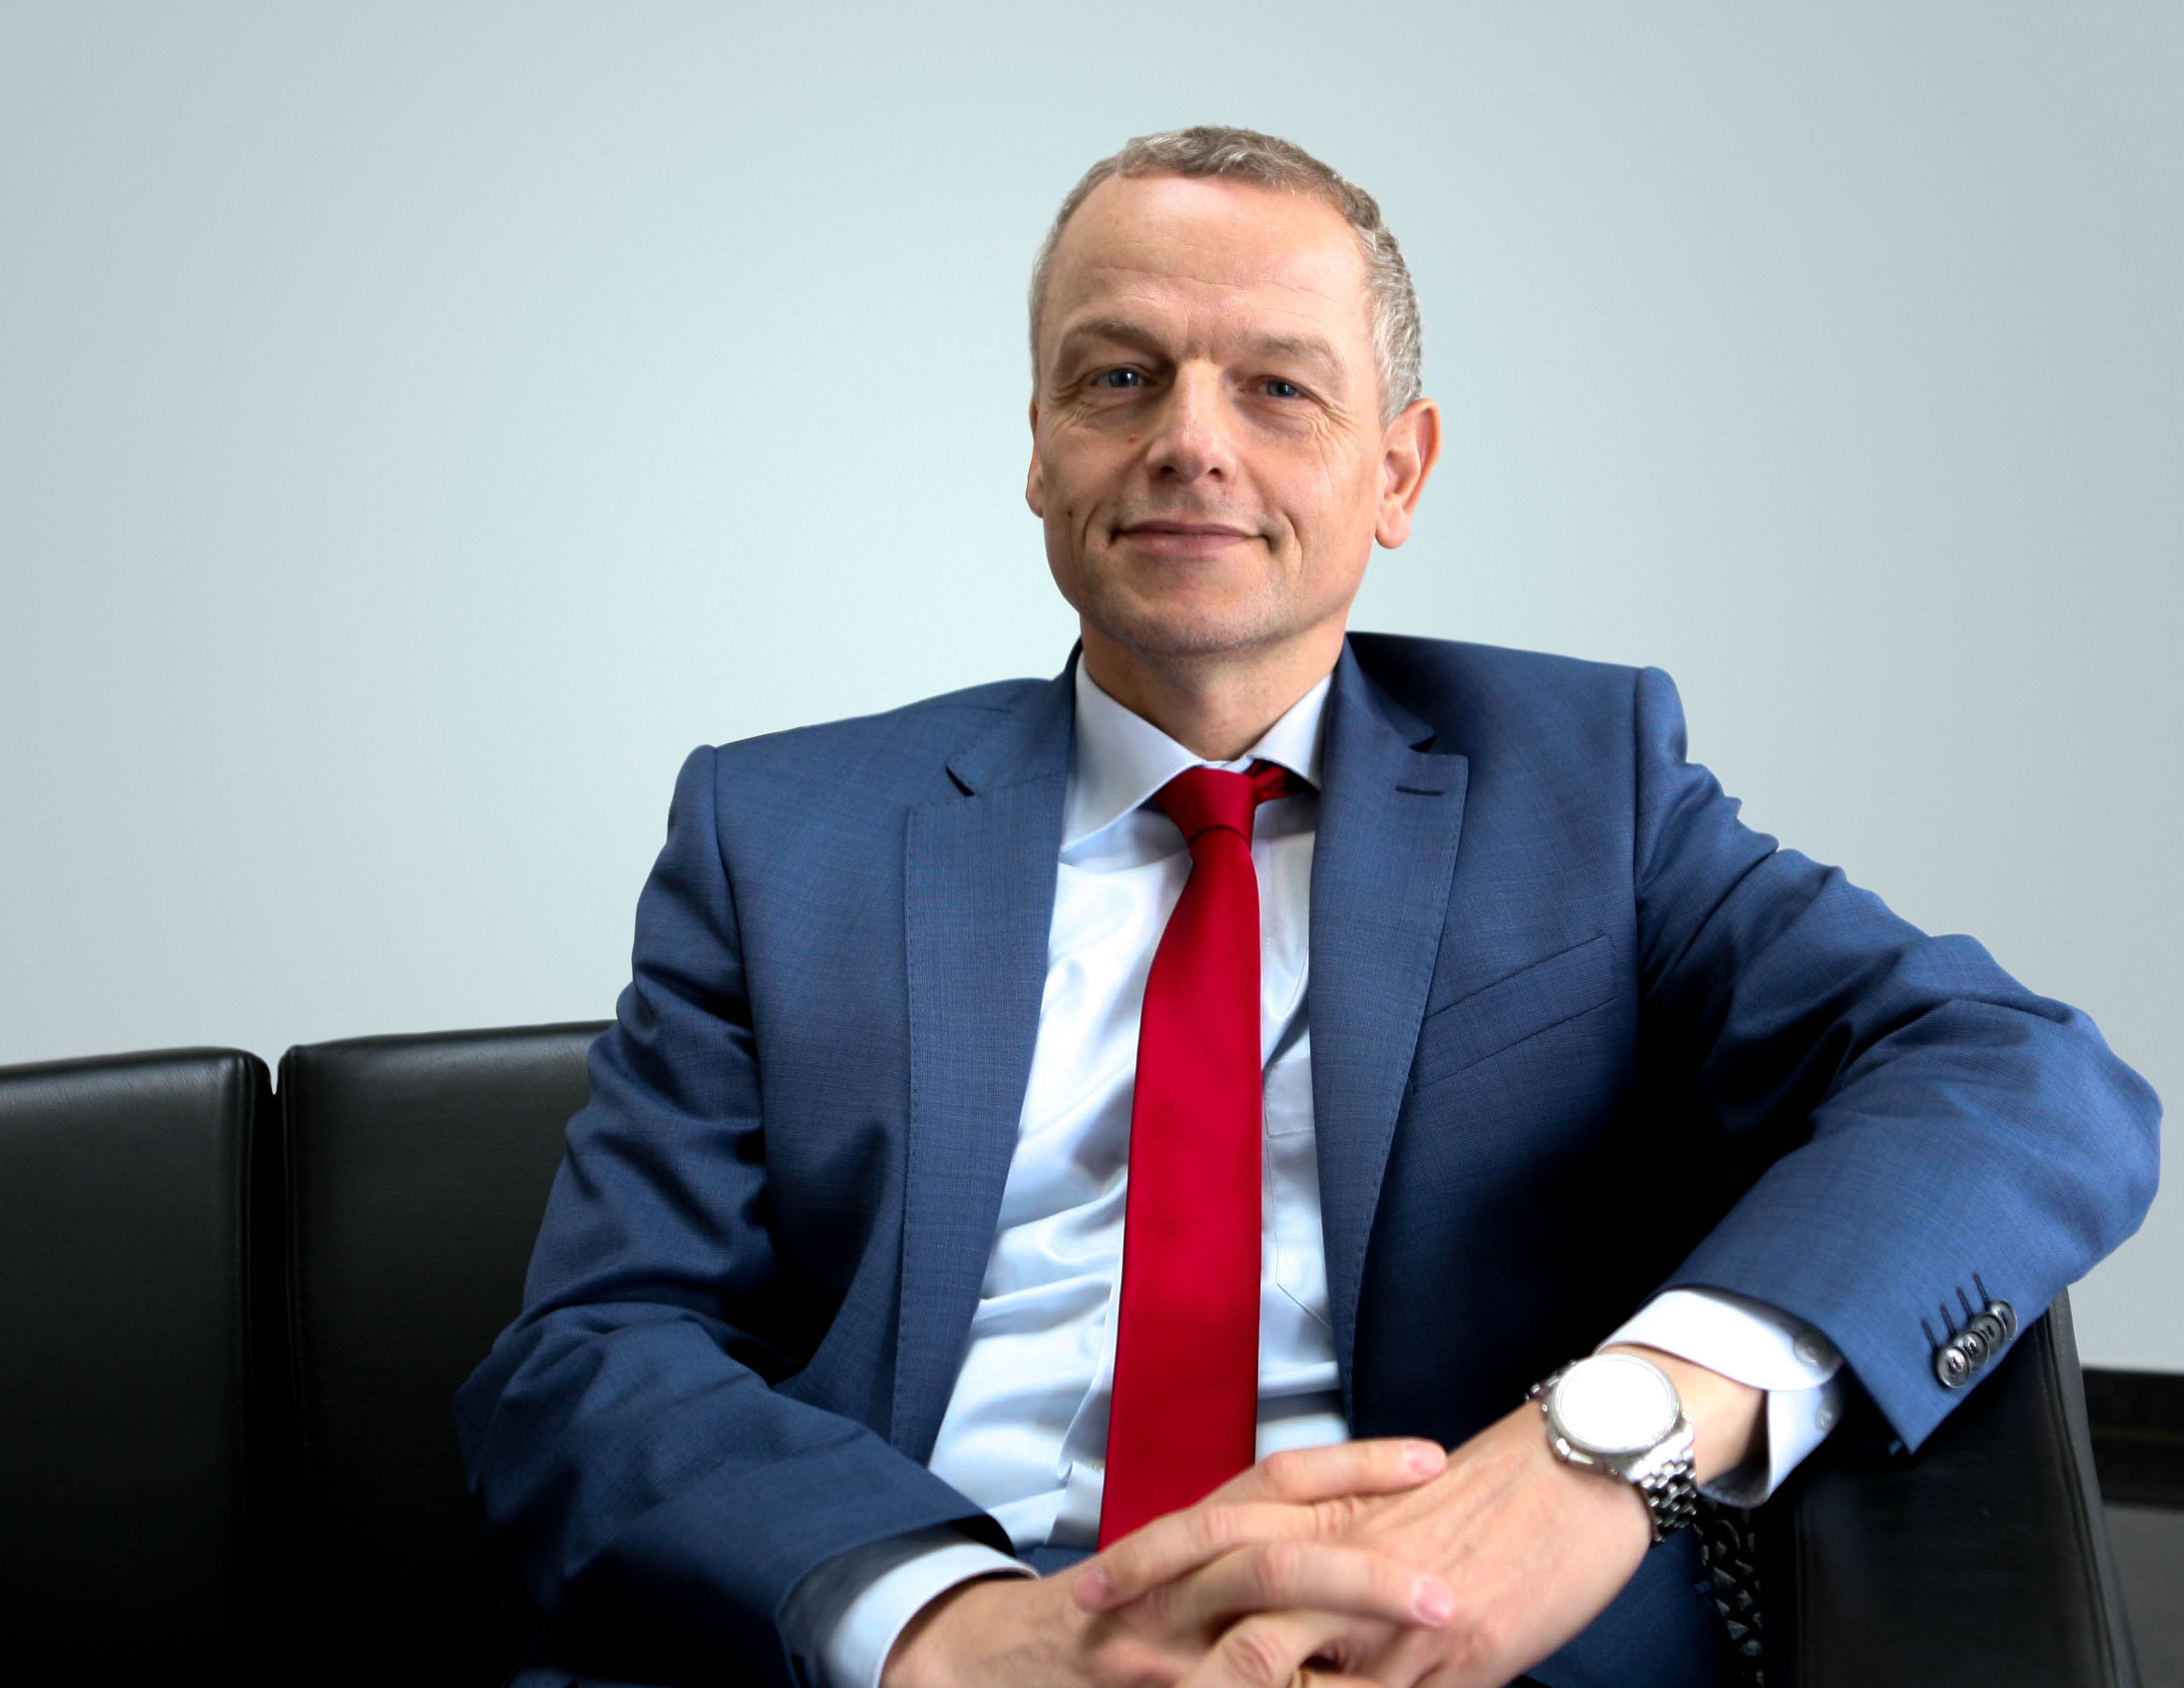 NagelGroup Joachim Ehlers to the new Chief Financial Officer